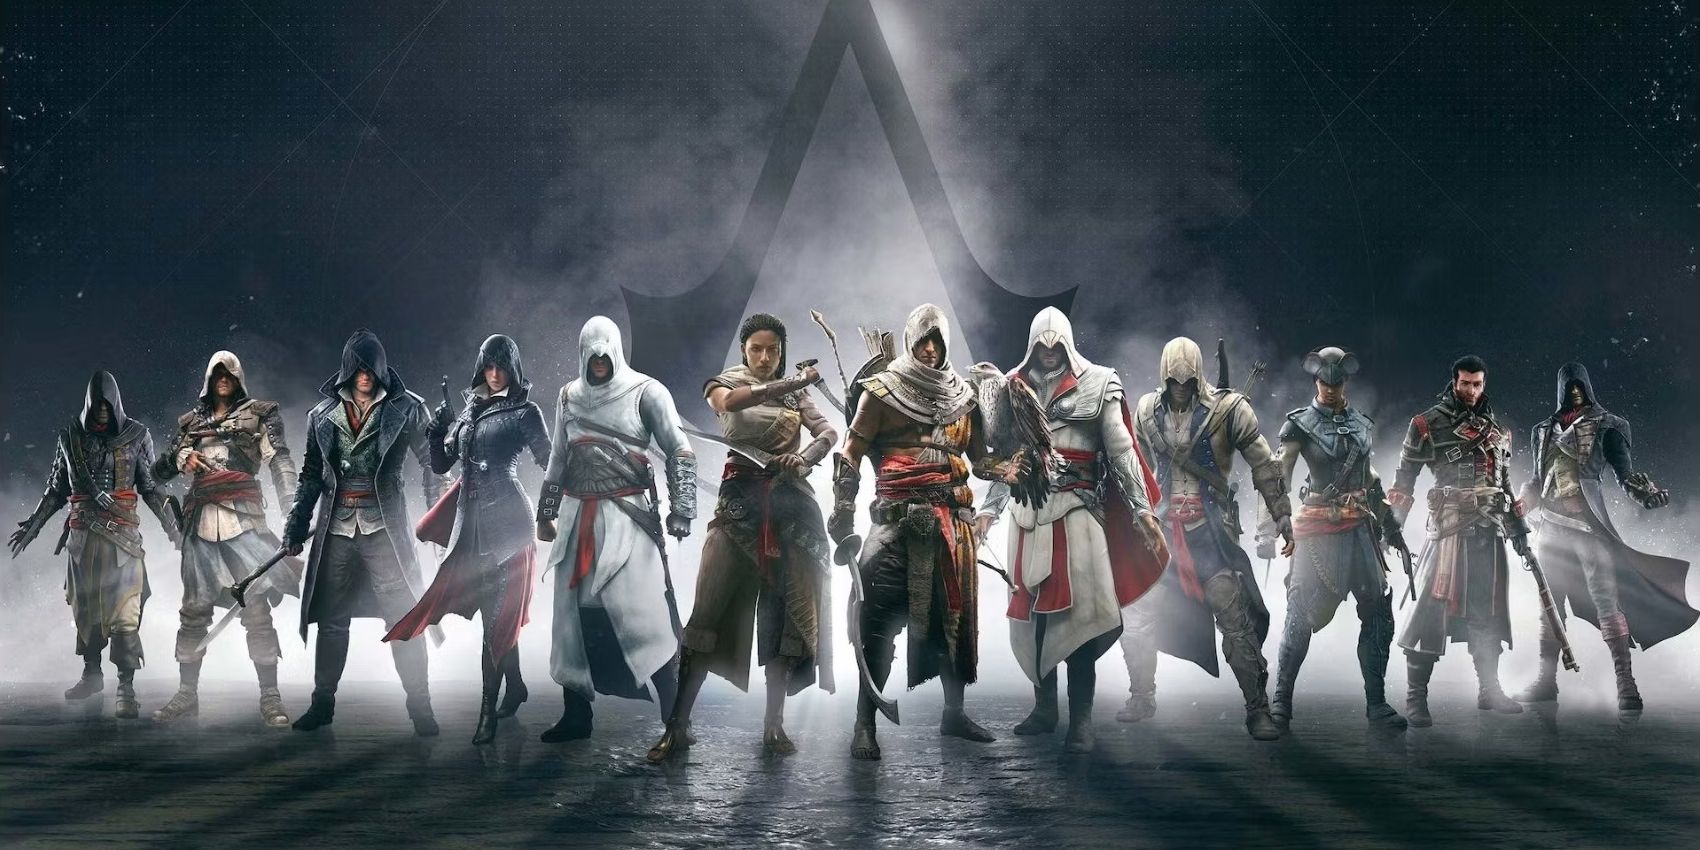 Assassin's Creed games in order: By release date and timeline